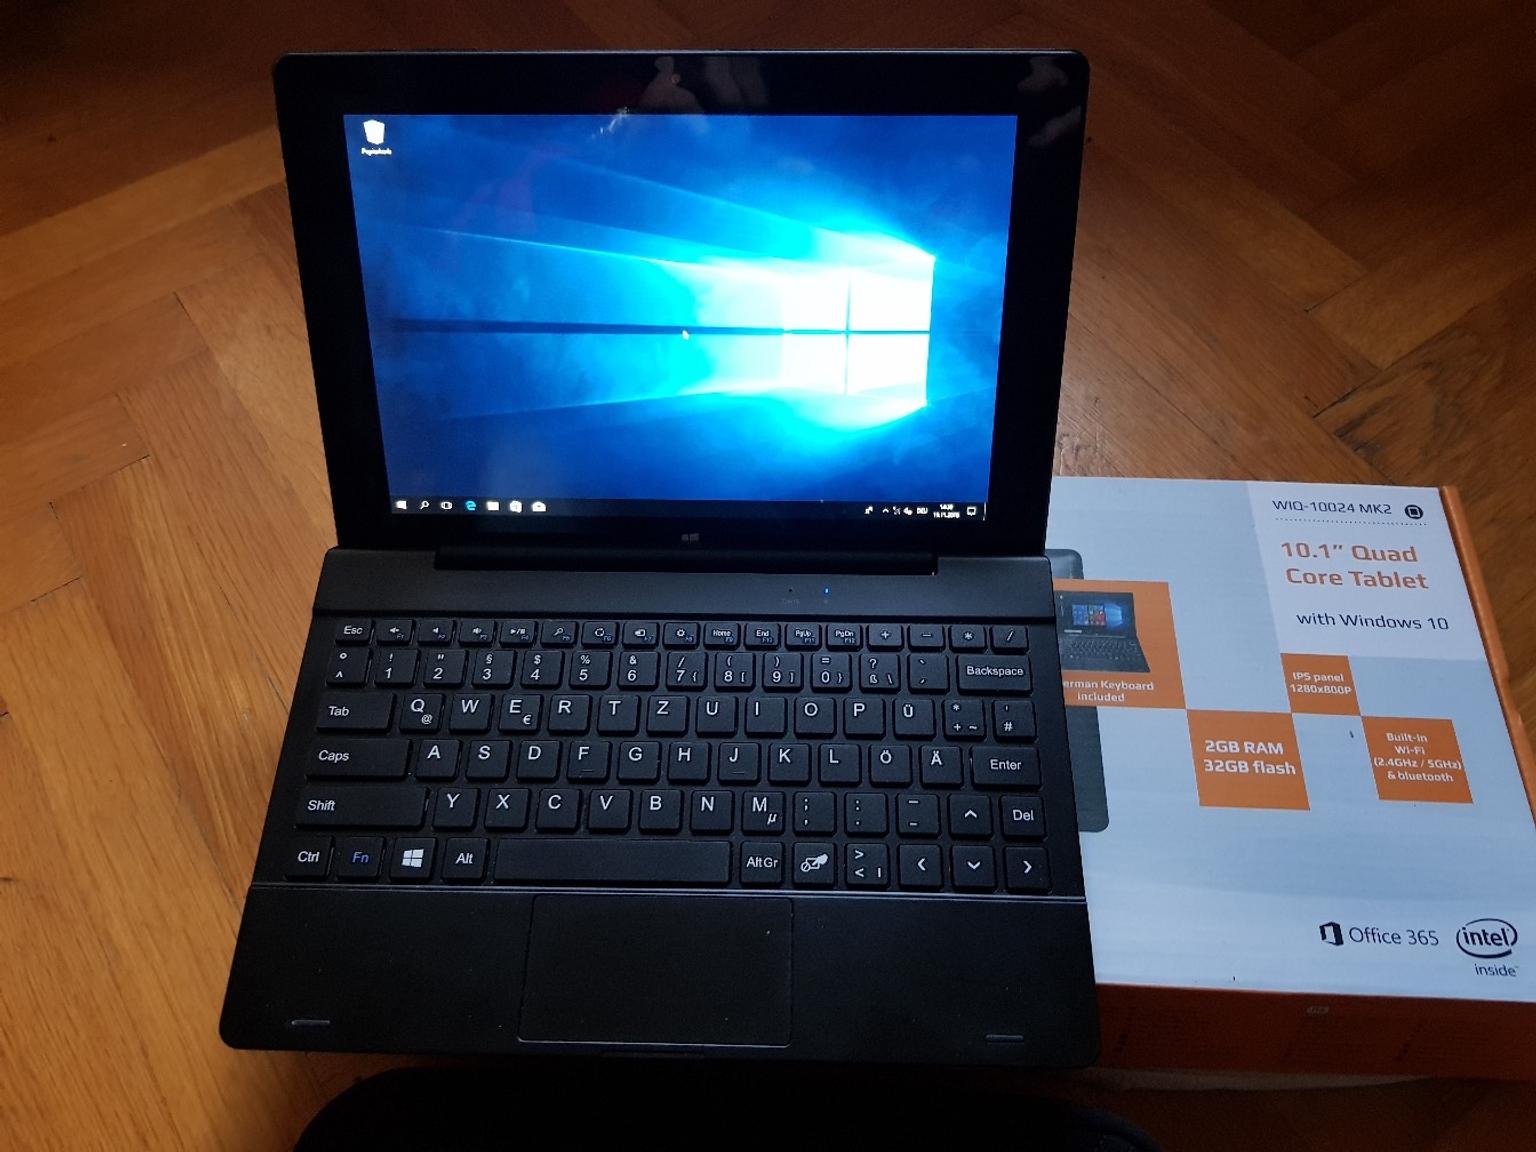 Windows 10 Zoll Tablet In 40 Linz For 79 00 For Sale Shpock